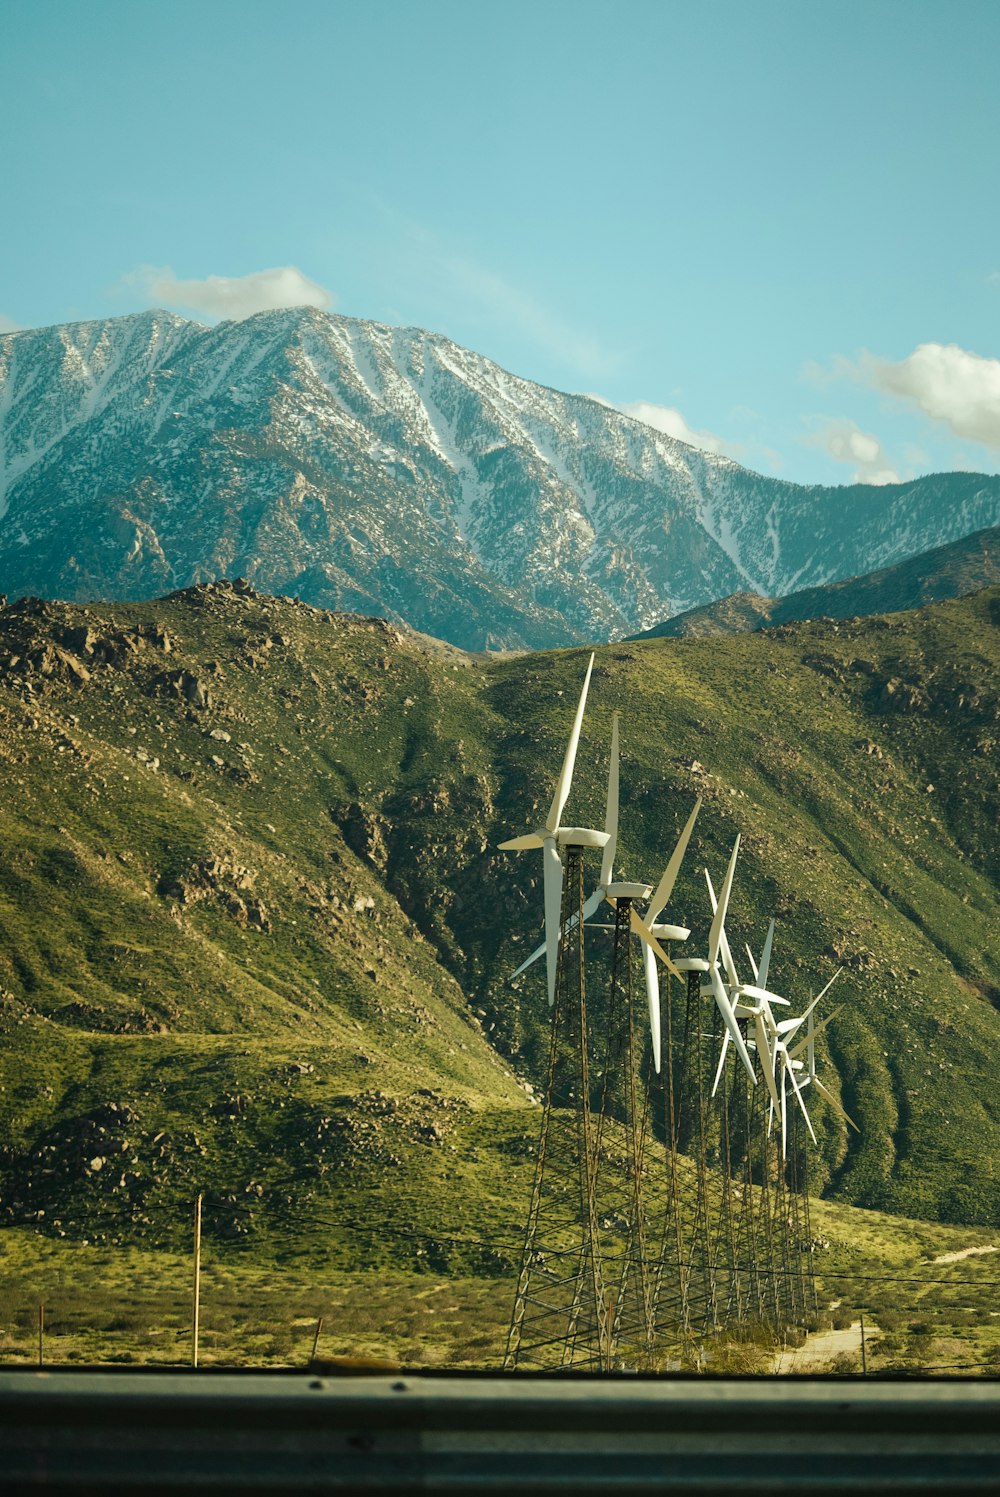 a bunch of windmills in a field with mountains in the background